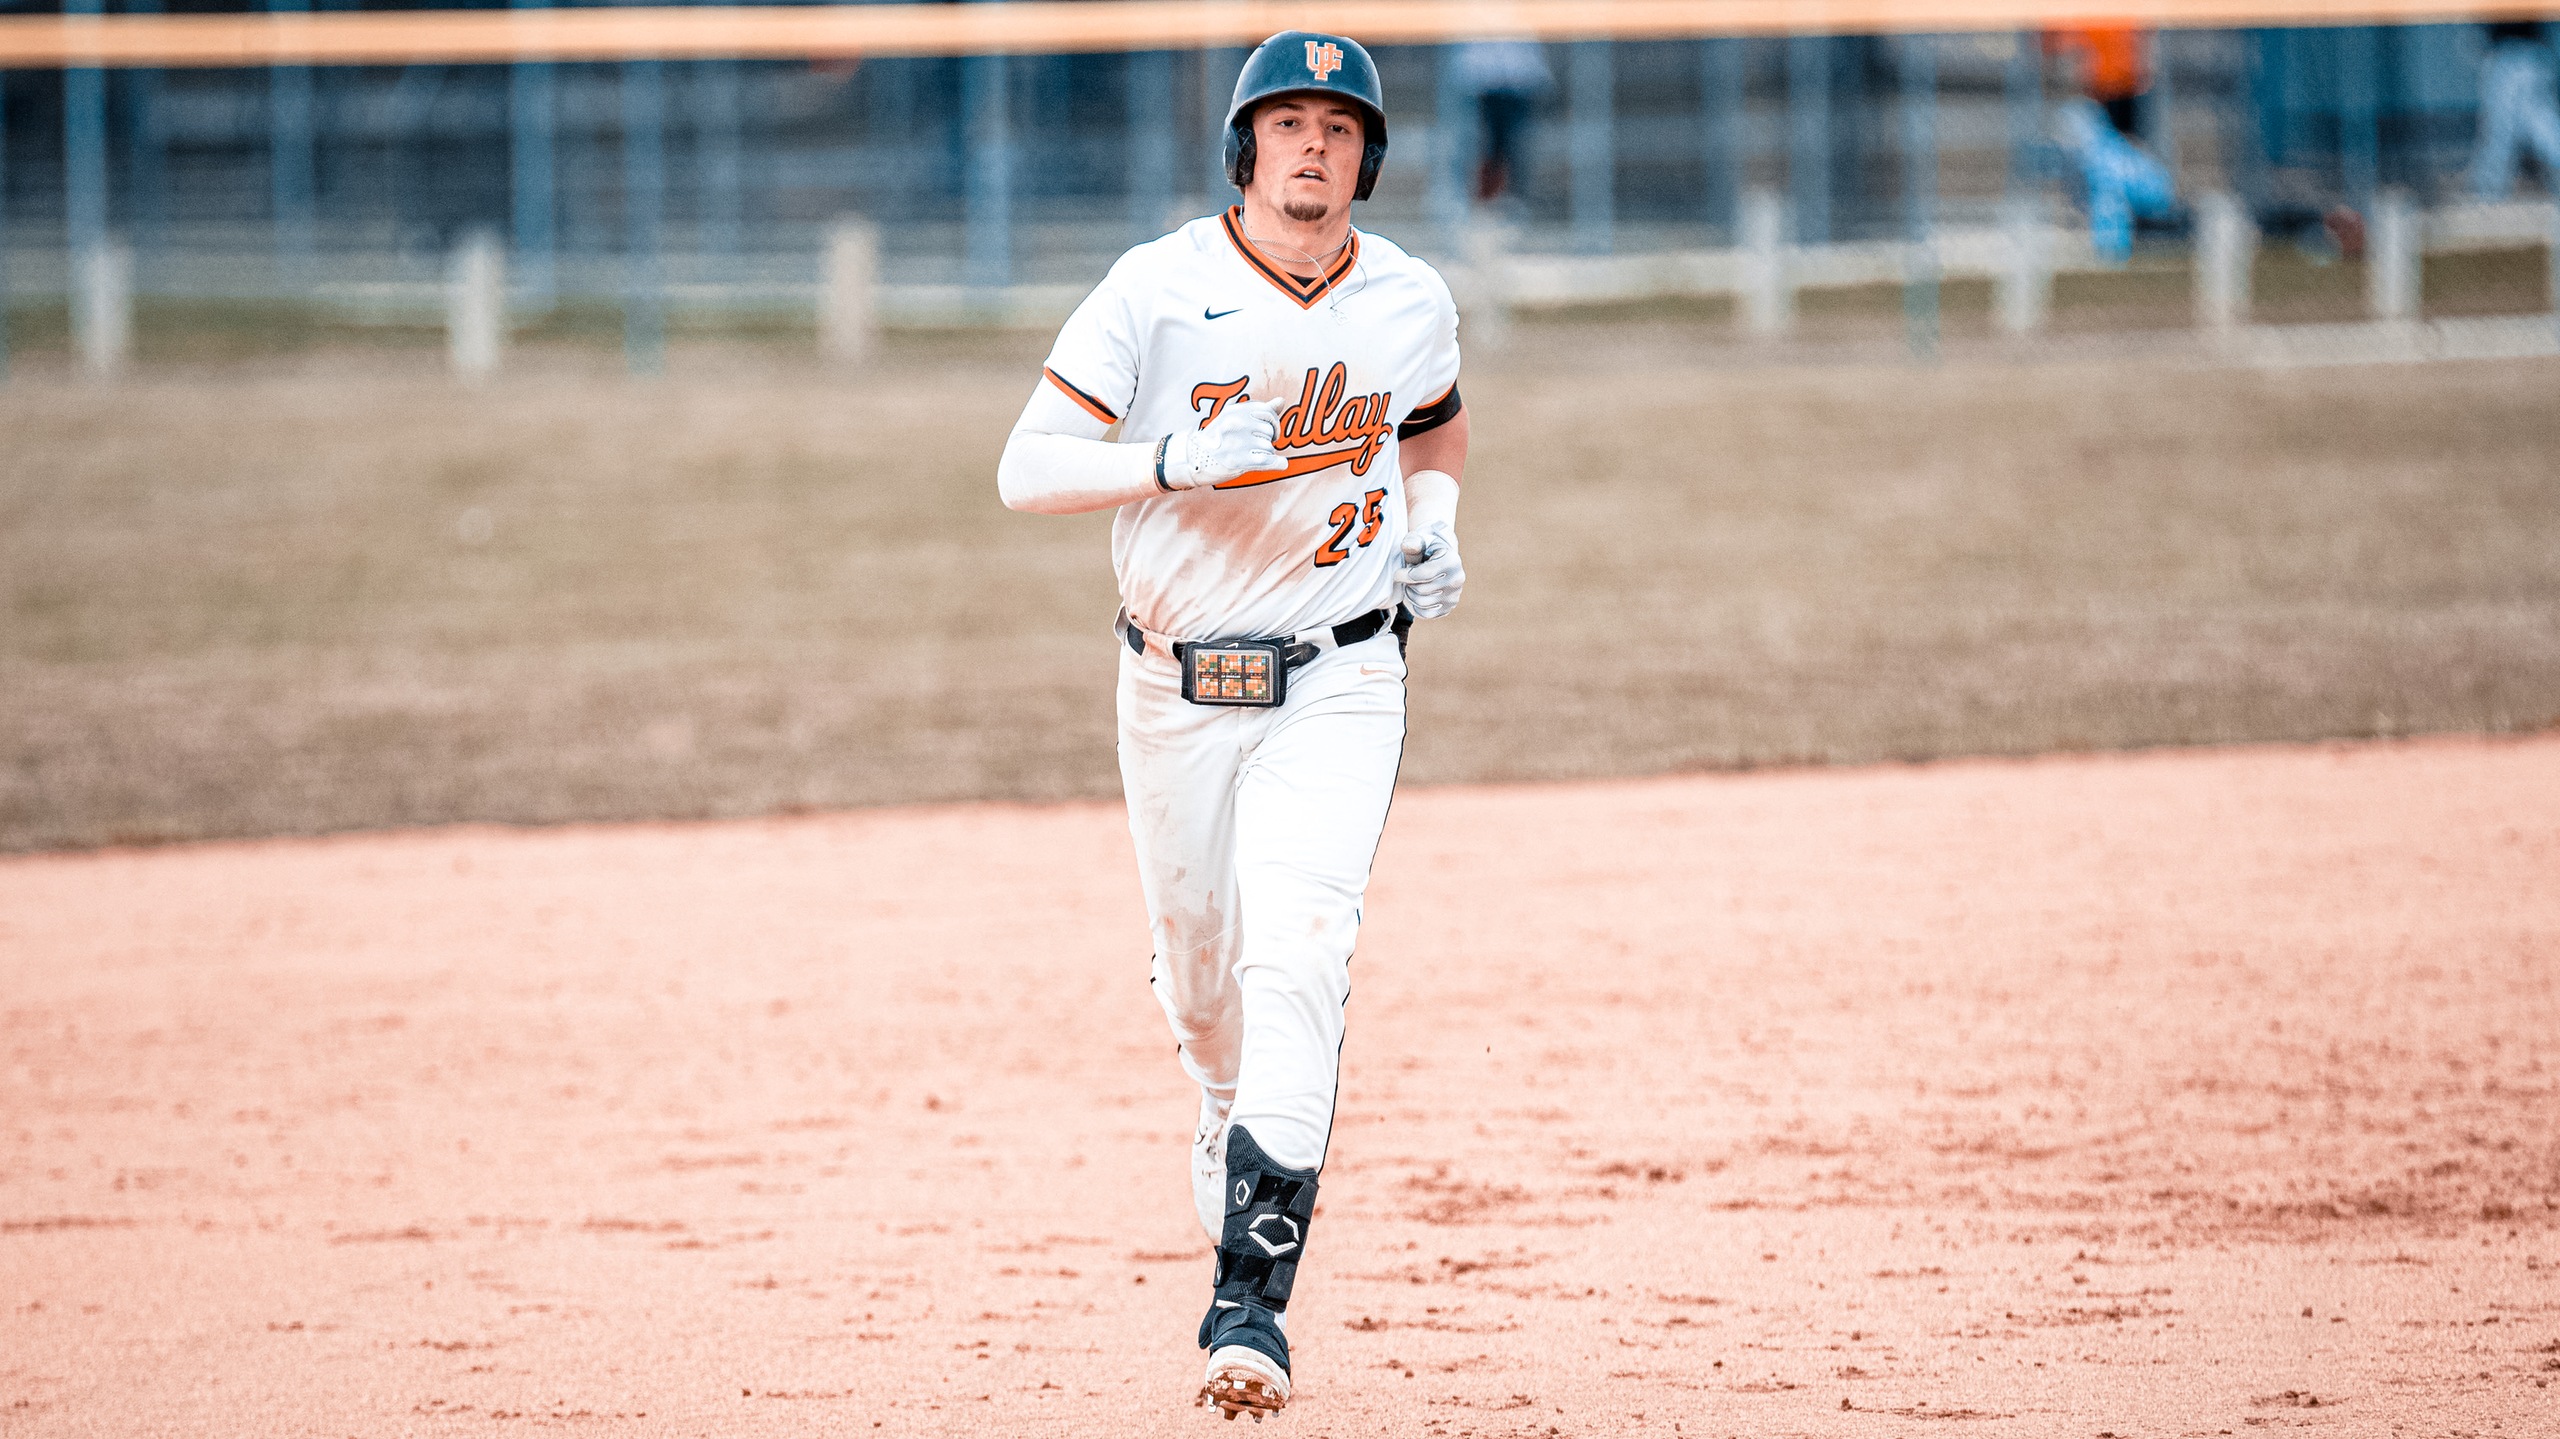 Farrar Becomes Oilers All-Time Home Run Leader | Oilers Drop Two at Northwood